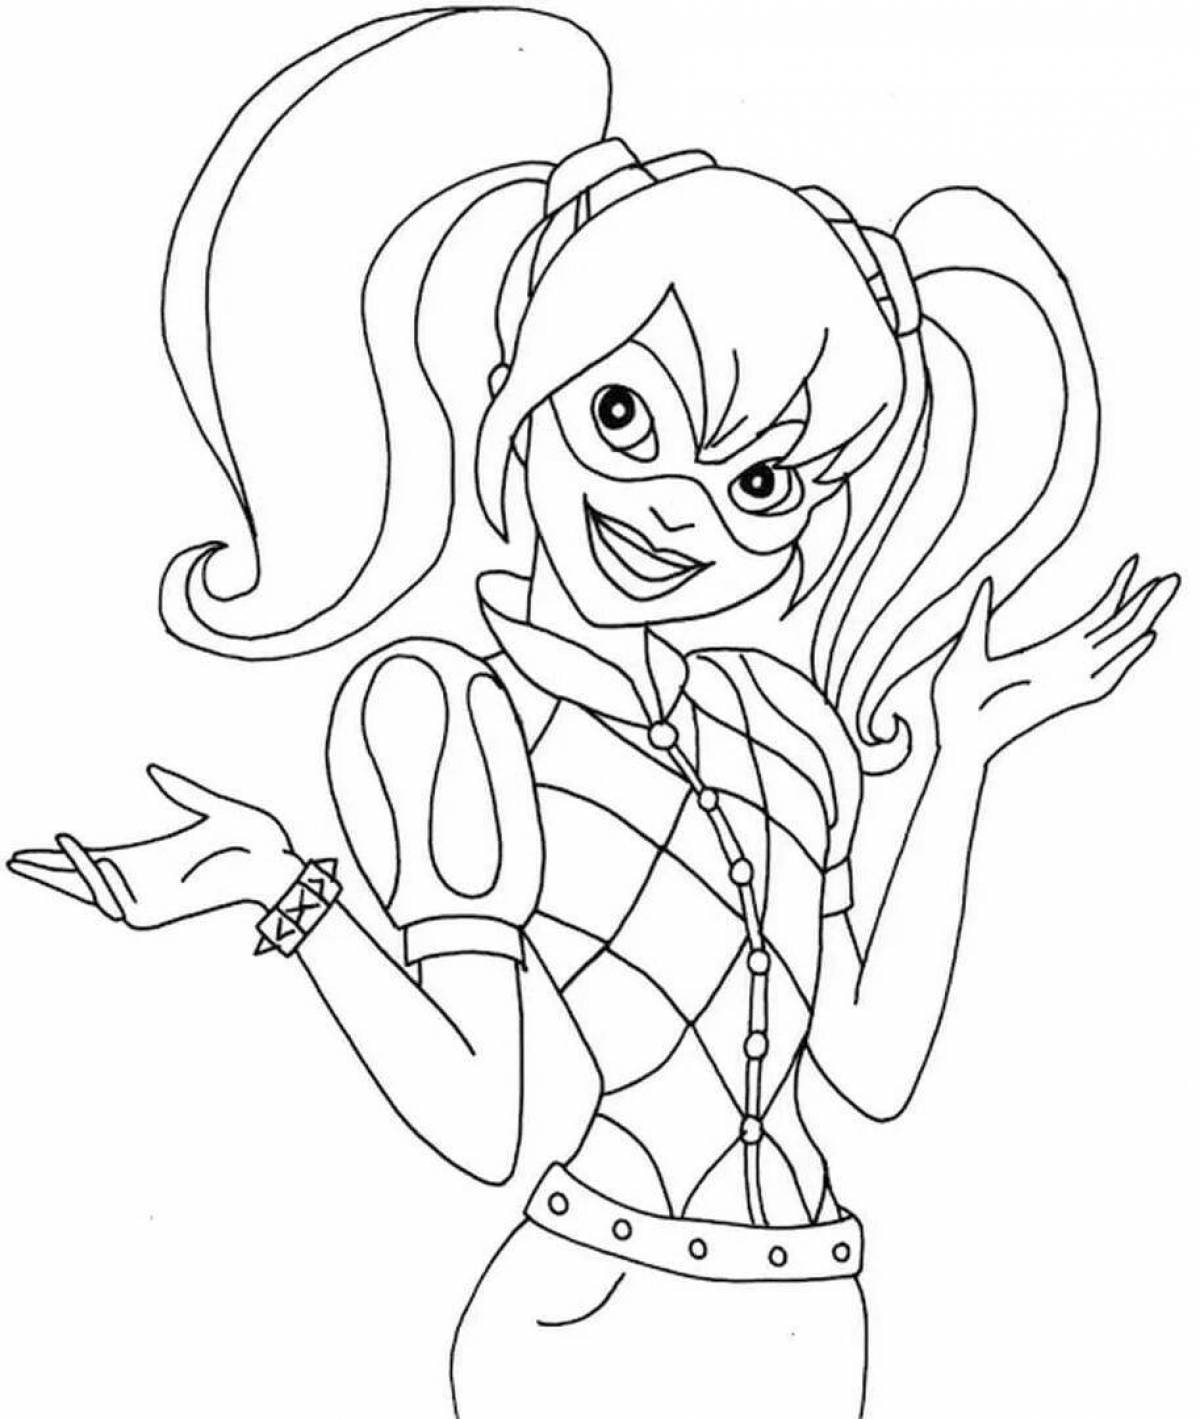 Harley Quinn funny coloring book for girls